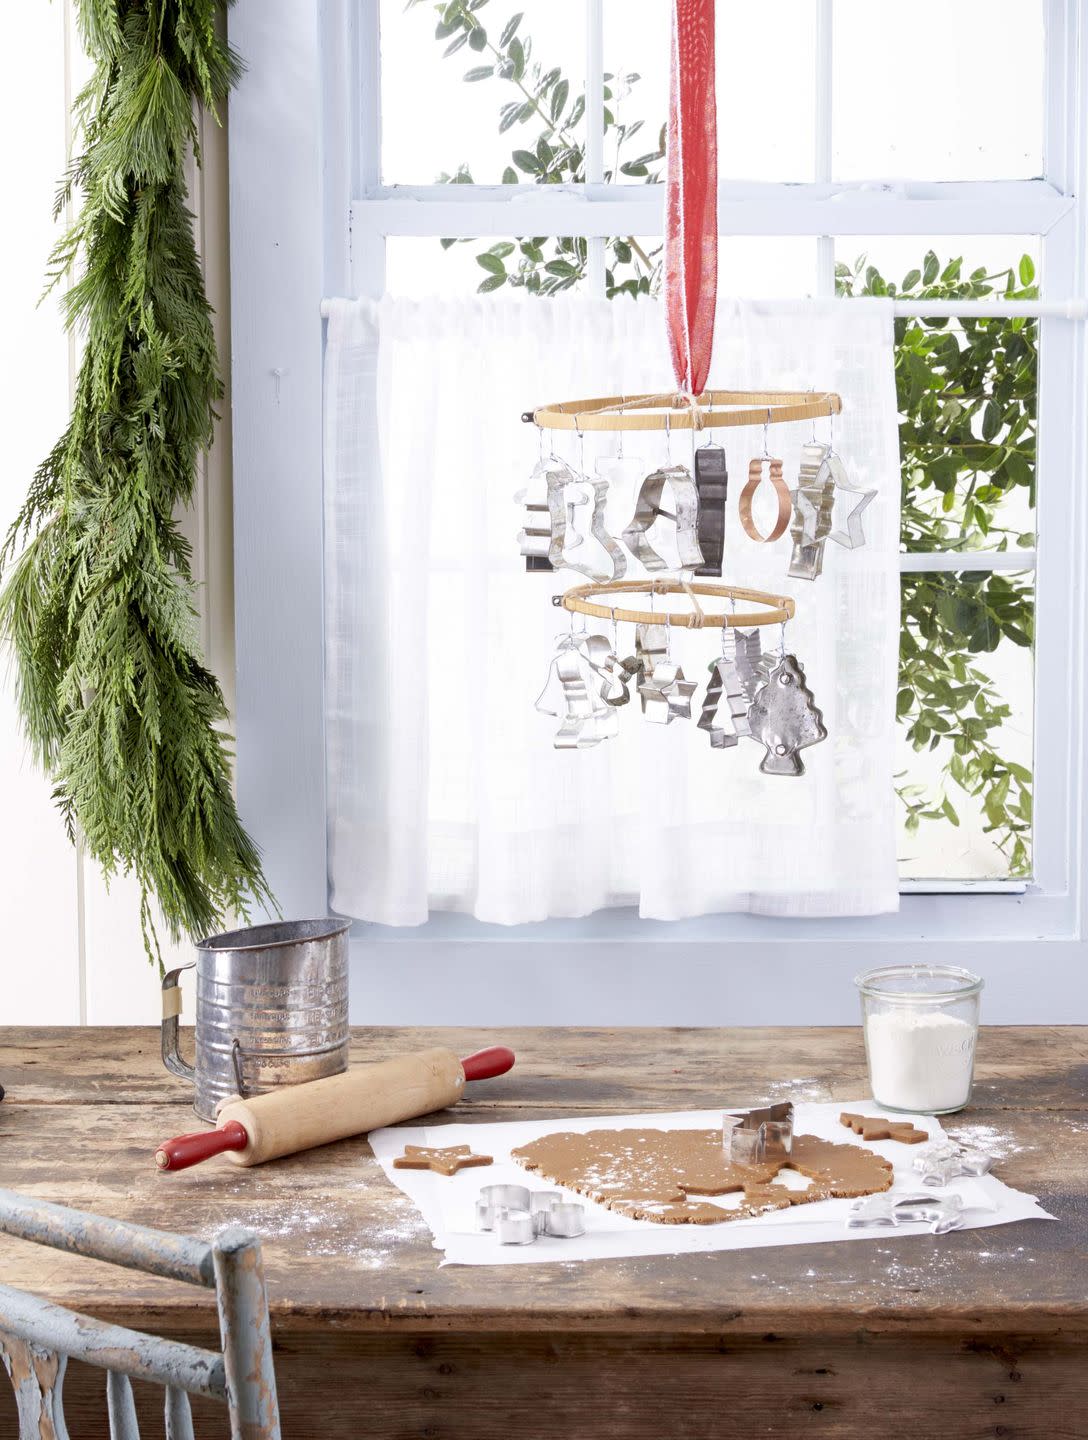 a mobile made from embroidery hoops and cookies cutter haning in front of a window, and above a table that has gingerbread cookie dough on it